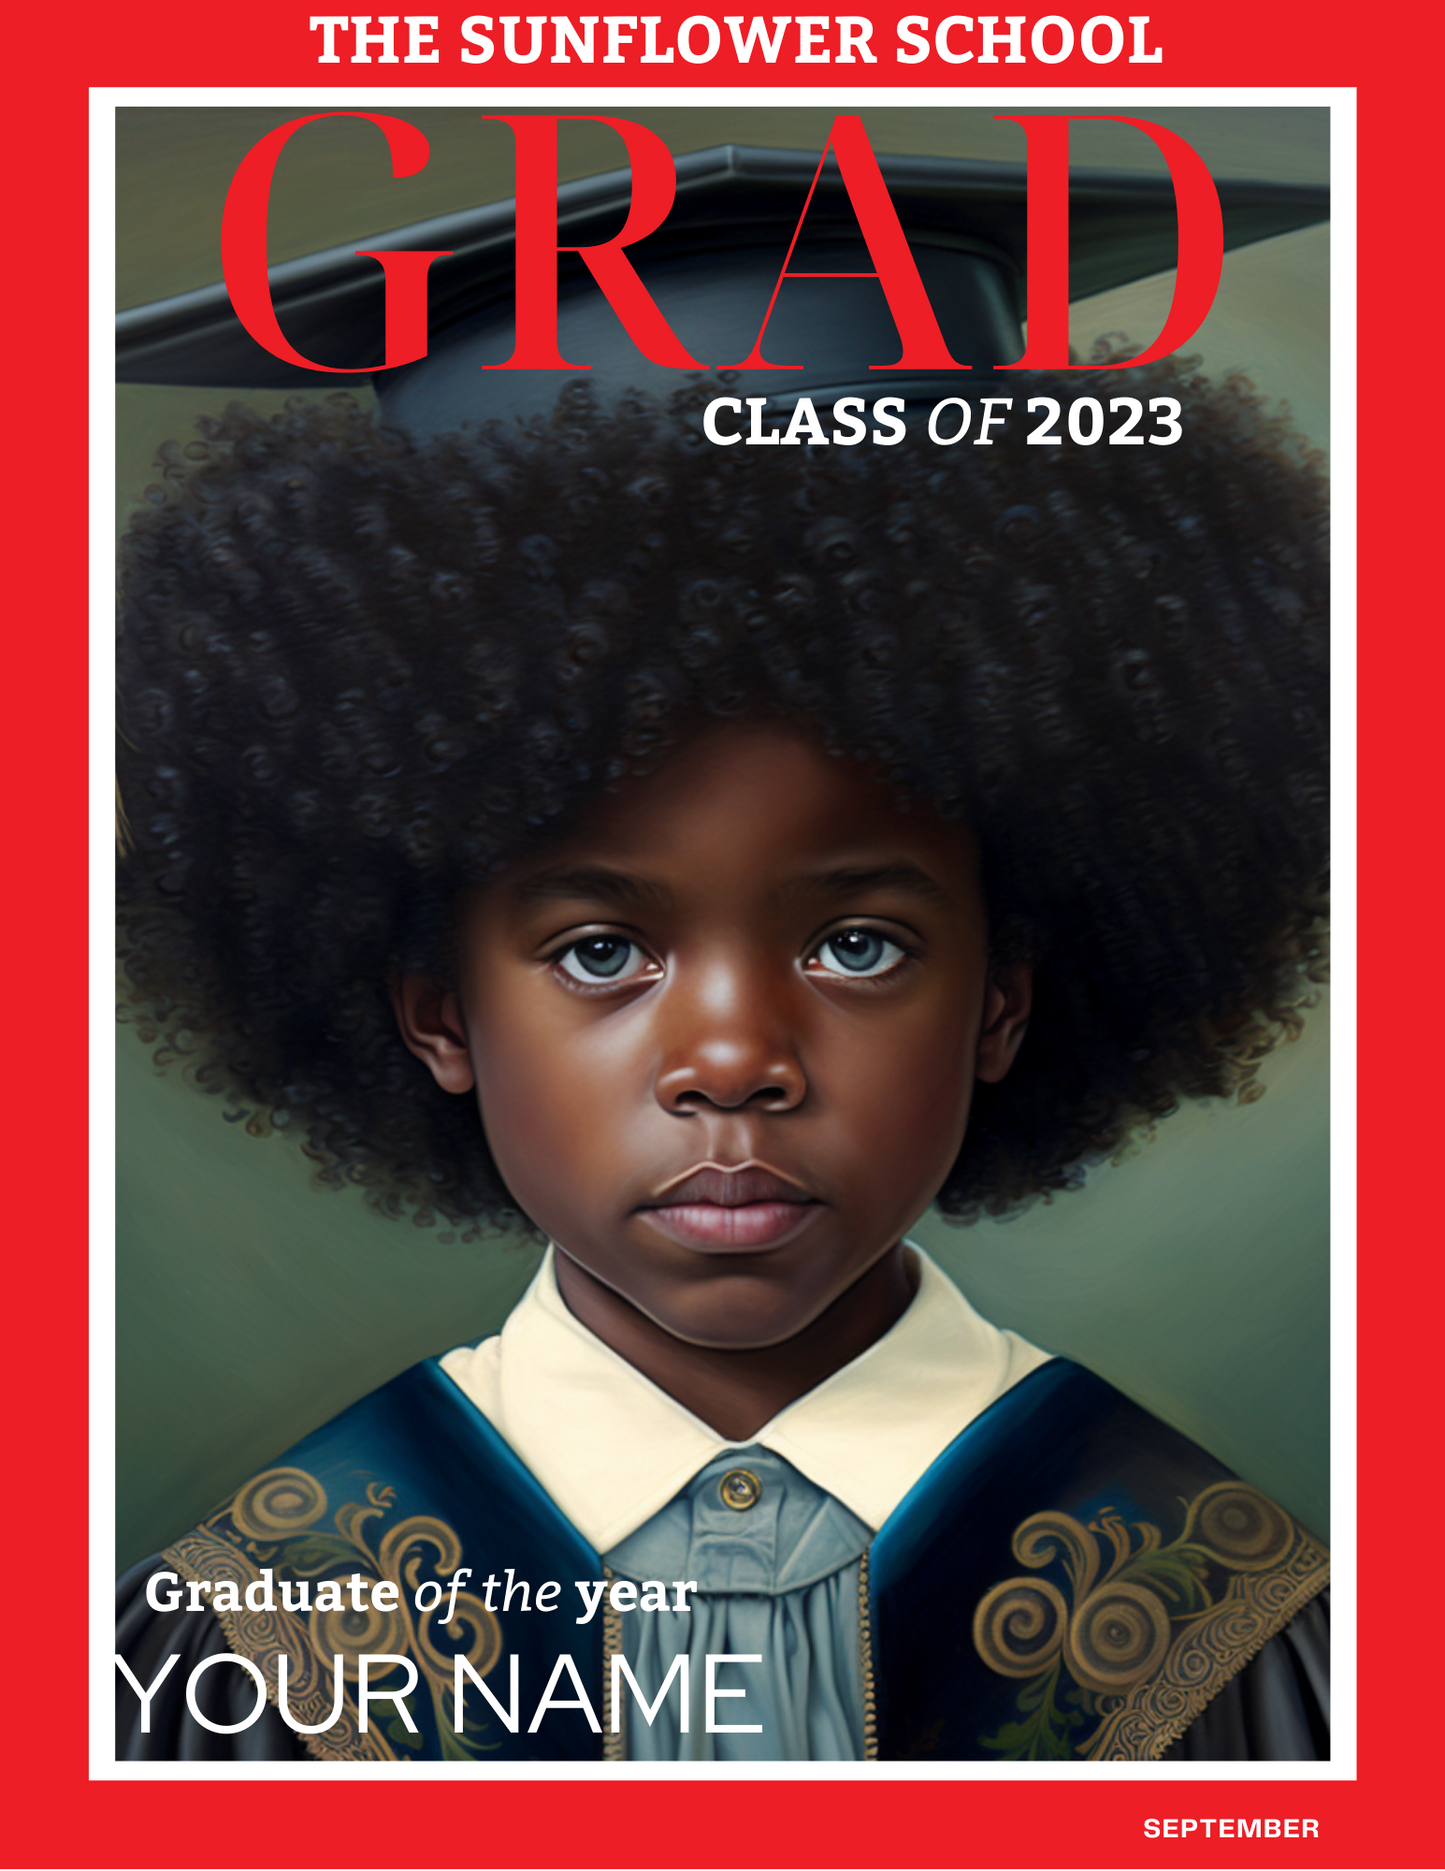 Personalized Kindergarten Graduation Magazine Cover - Be the Star!